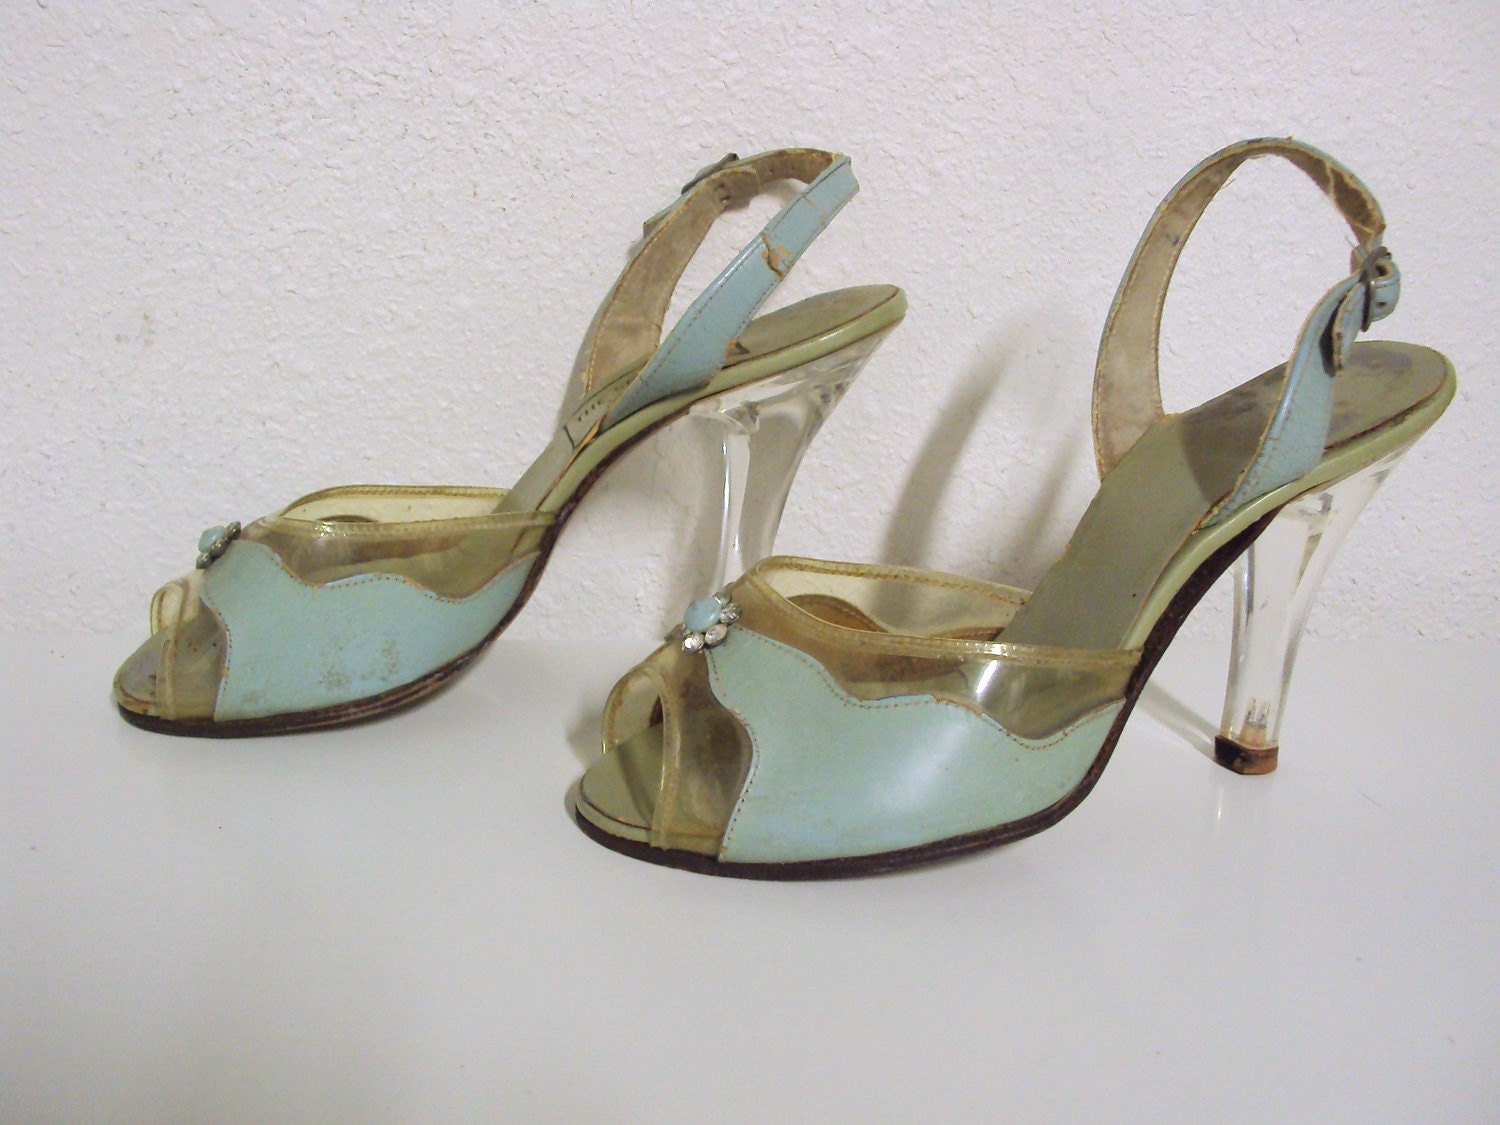 Lucite Heels with rhinestones and clear foot by CaliforniasVintage